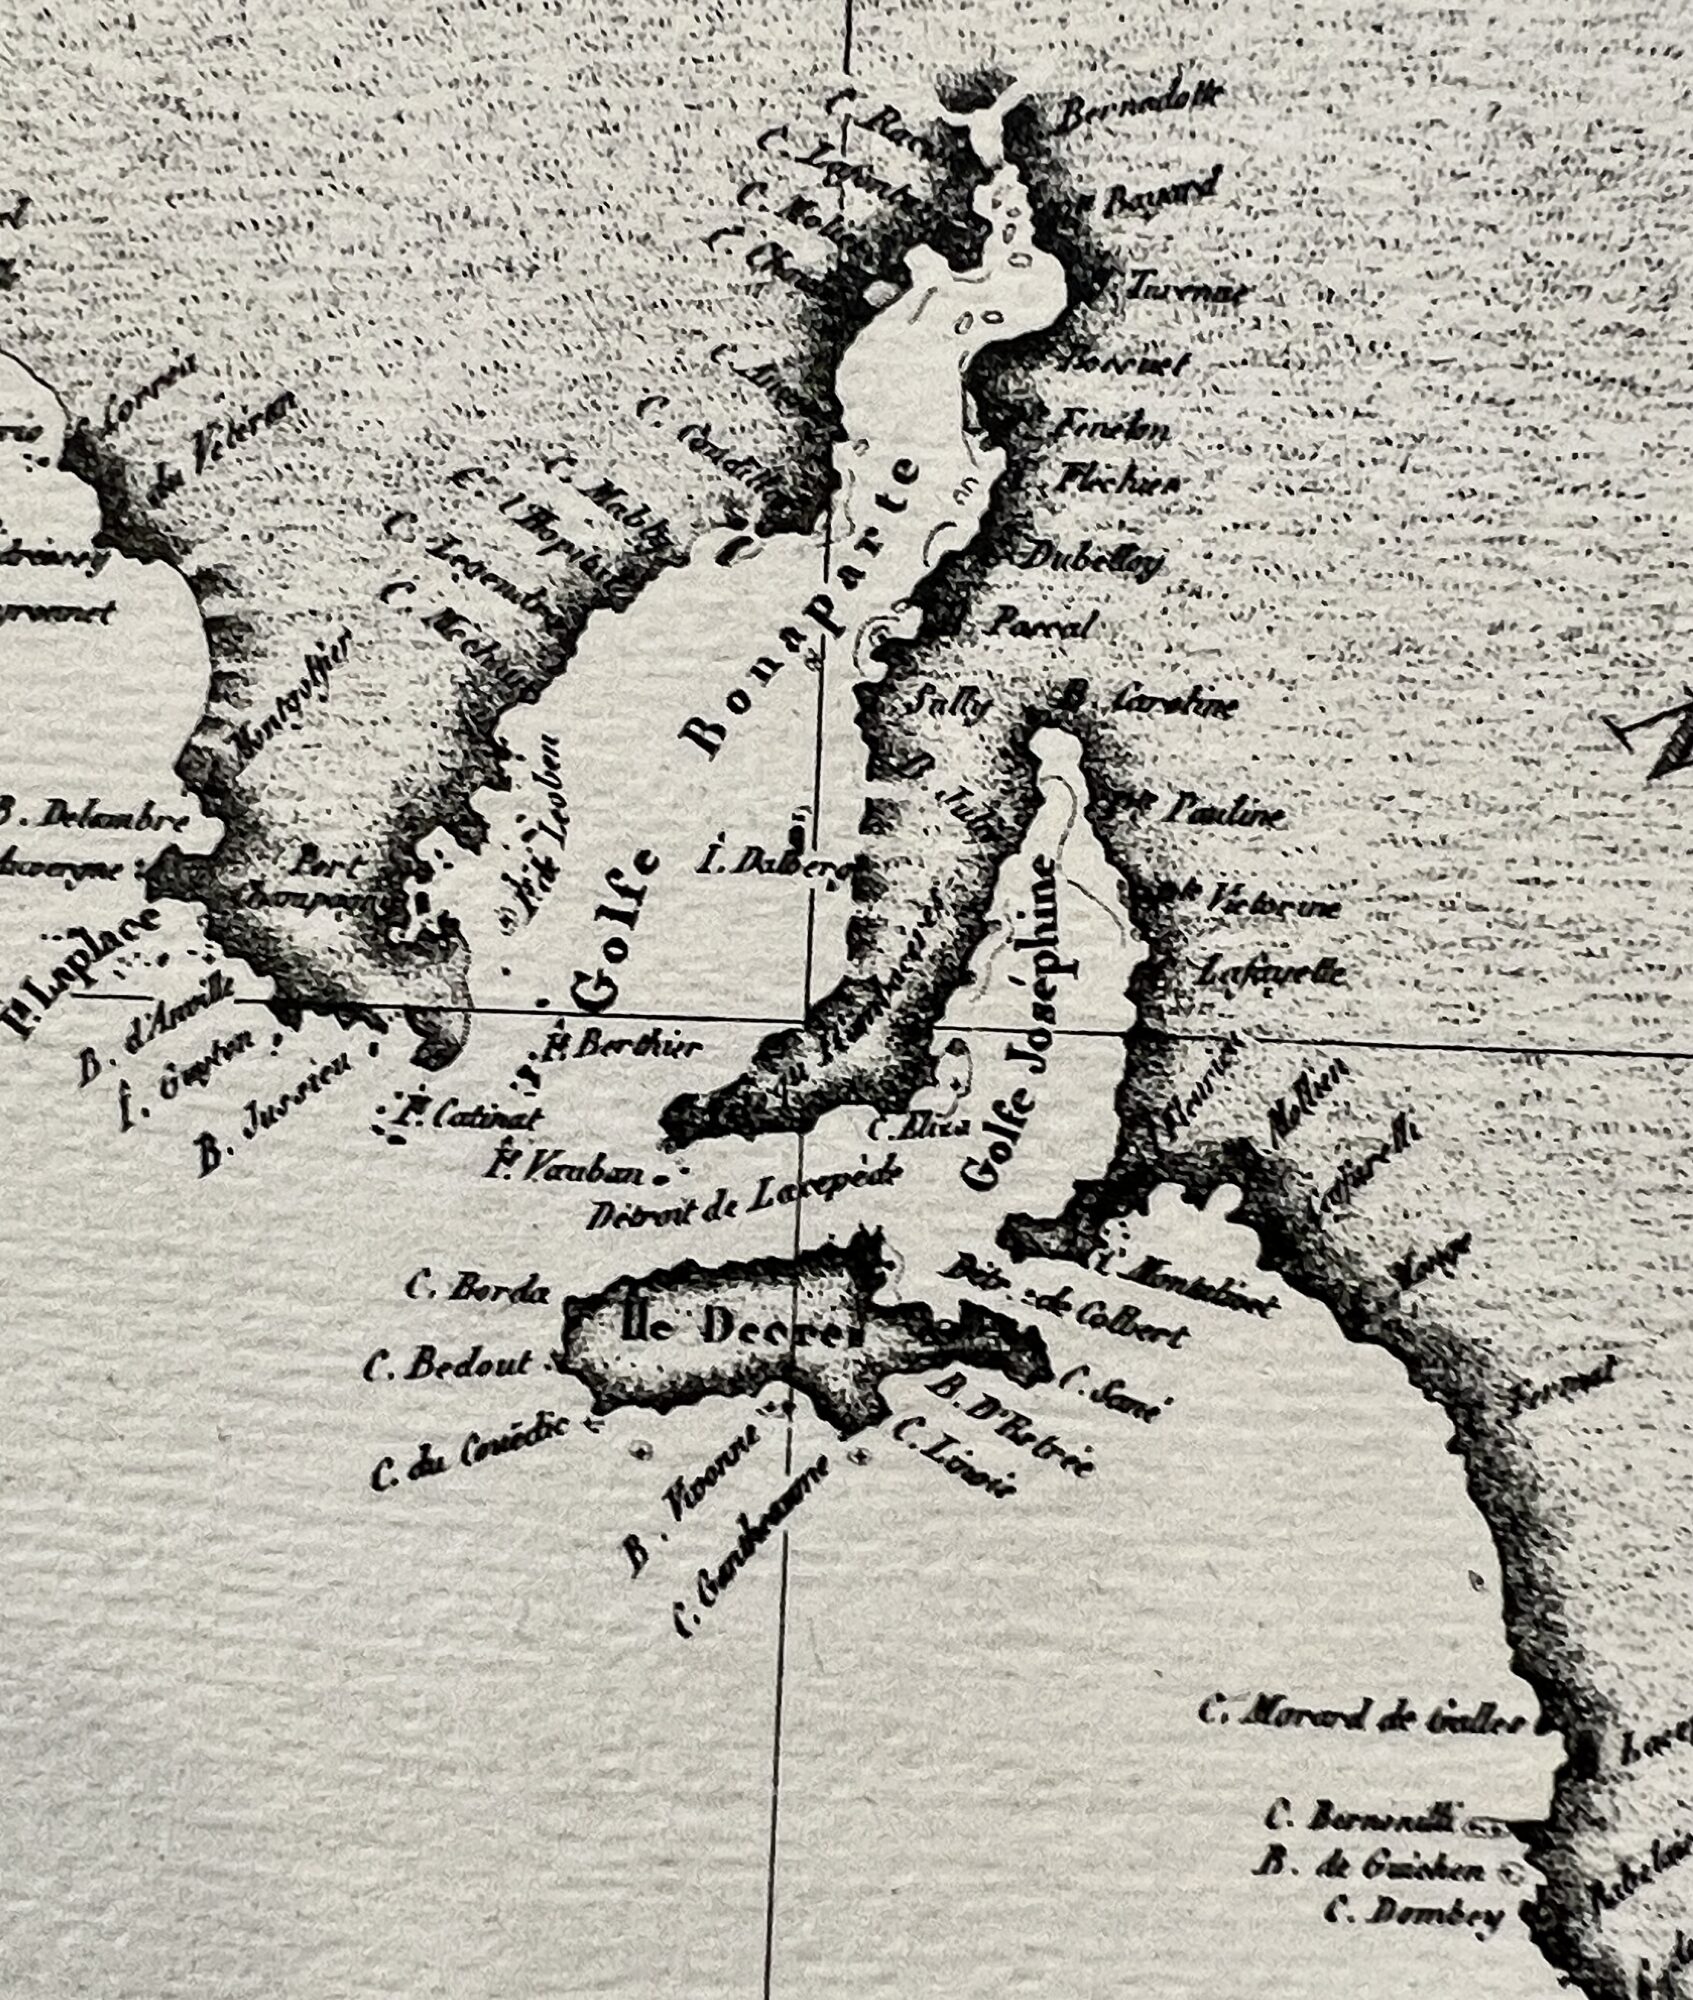 Baudin's Map of South Australia, note the names!